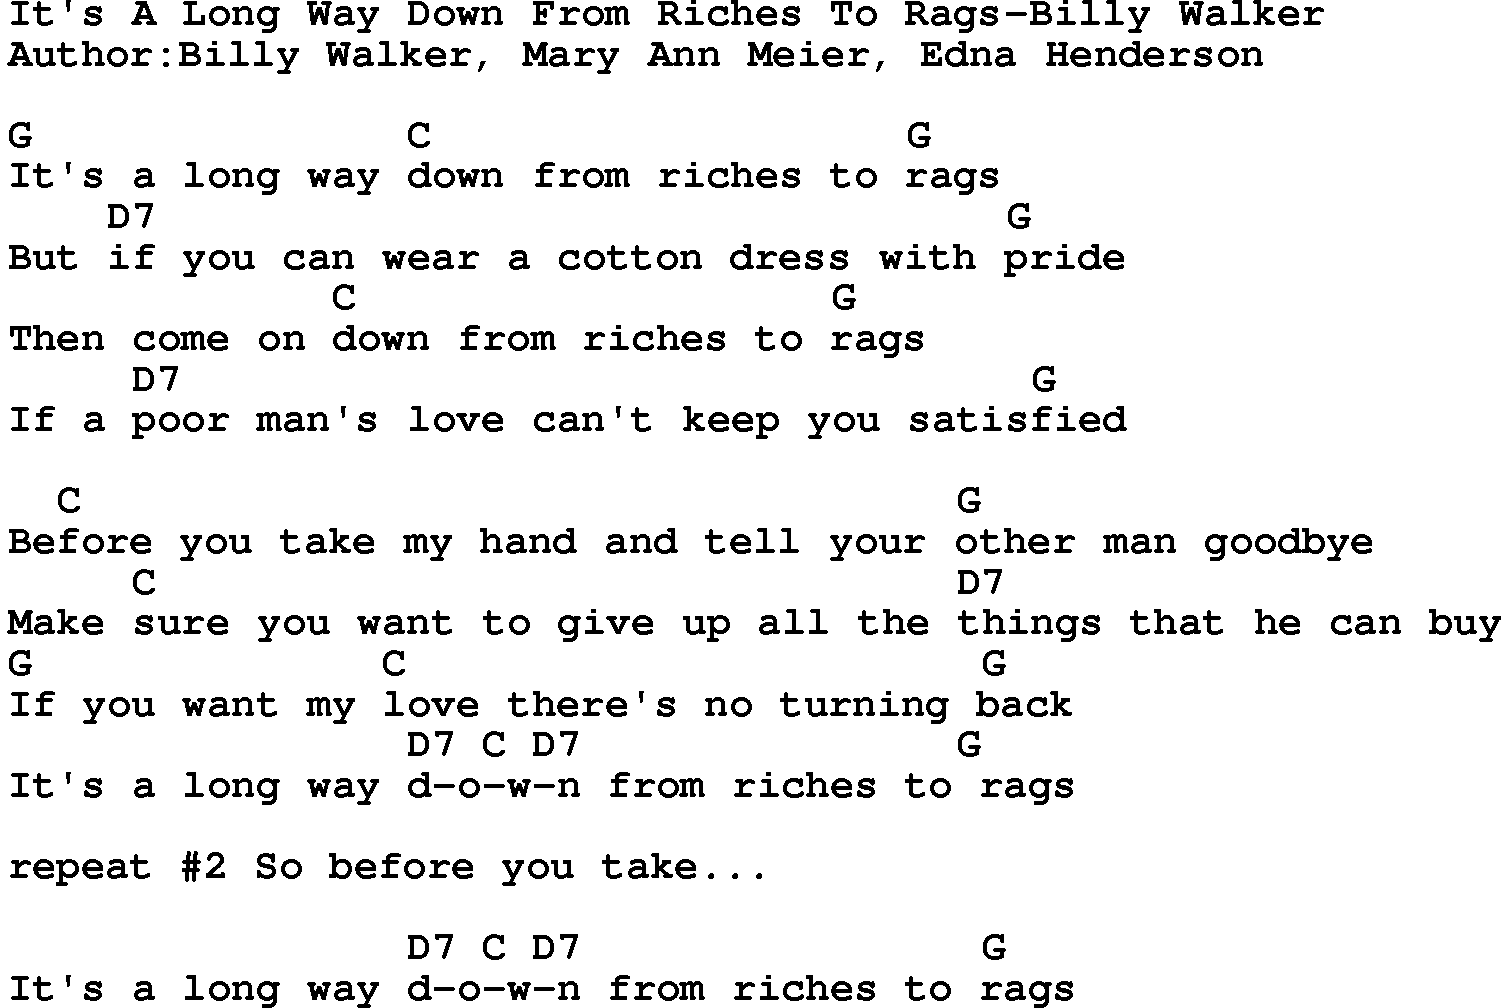 Country music song: It's A Long Way Down From Riches To Rags-Billy Walker lyrics and chords